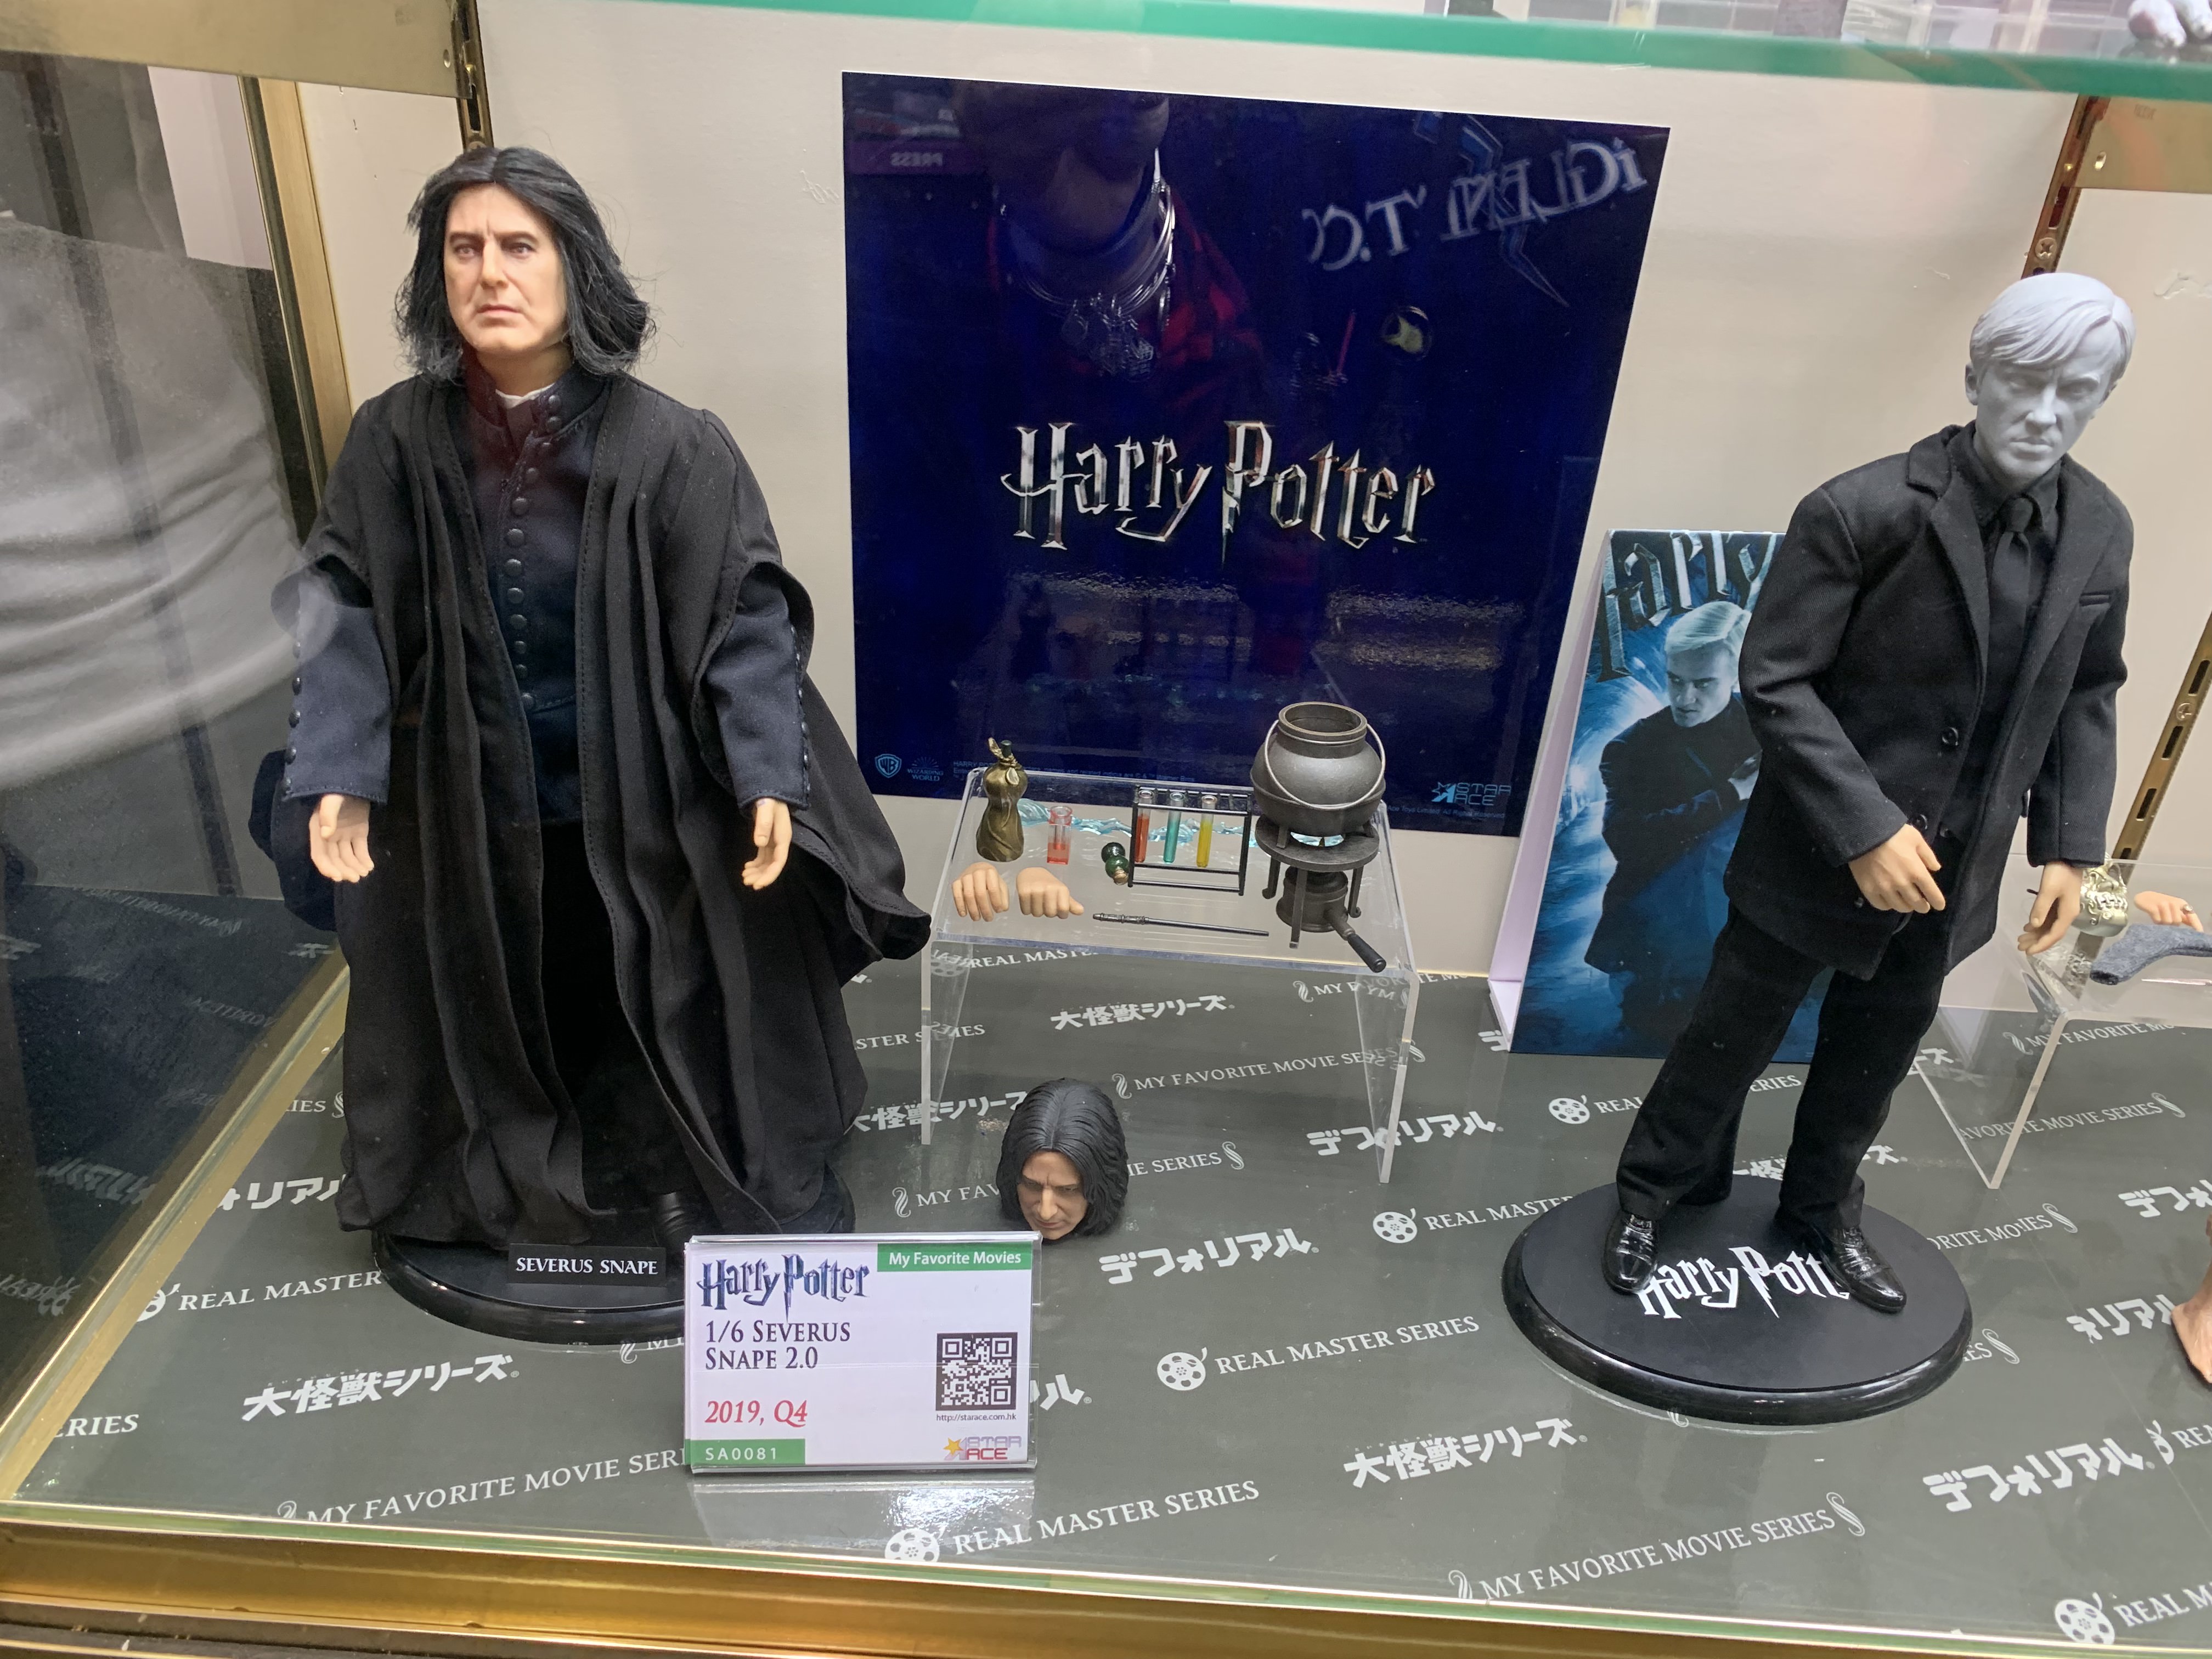 Figurines of Snape and Draco stand beside each other.